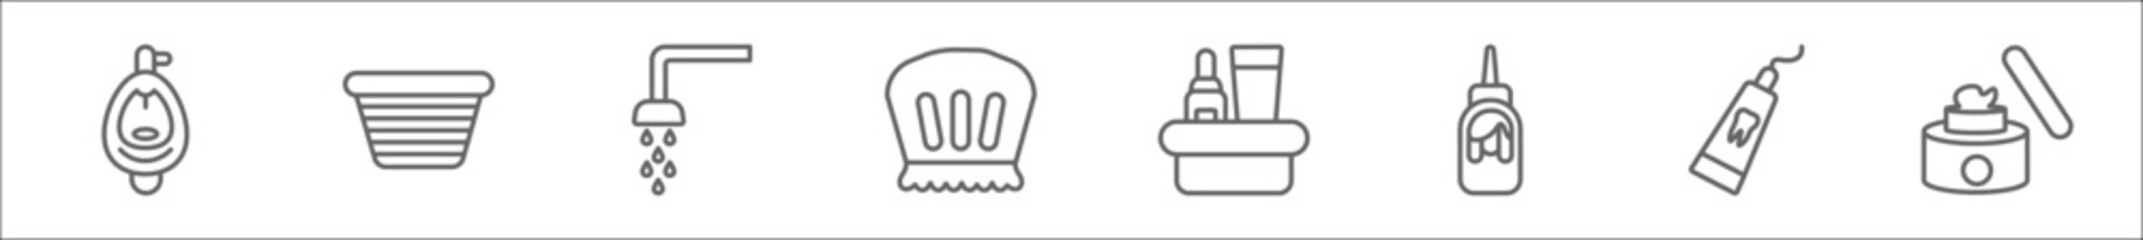 outline set of hygiene line icons. linear vector icons such as urinal, laundry basket, douche, shower cap, hygiene kit, hair tonic, tooth paste, body cream